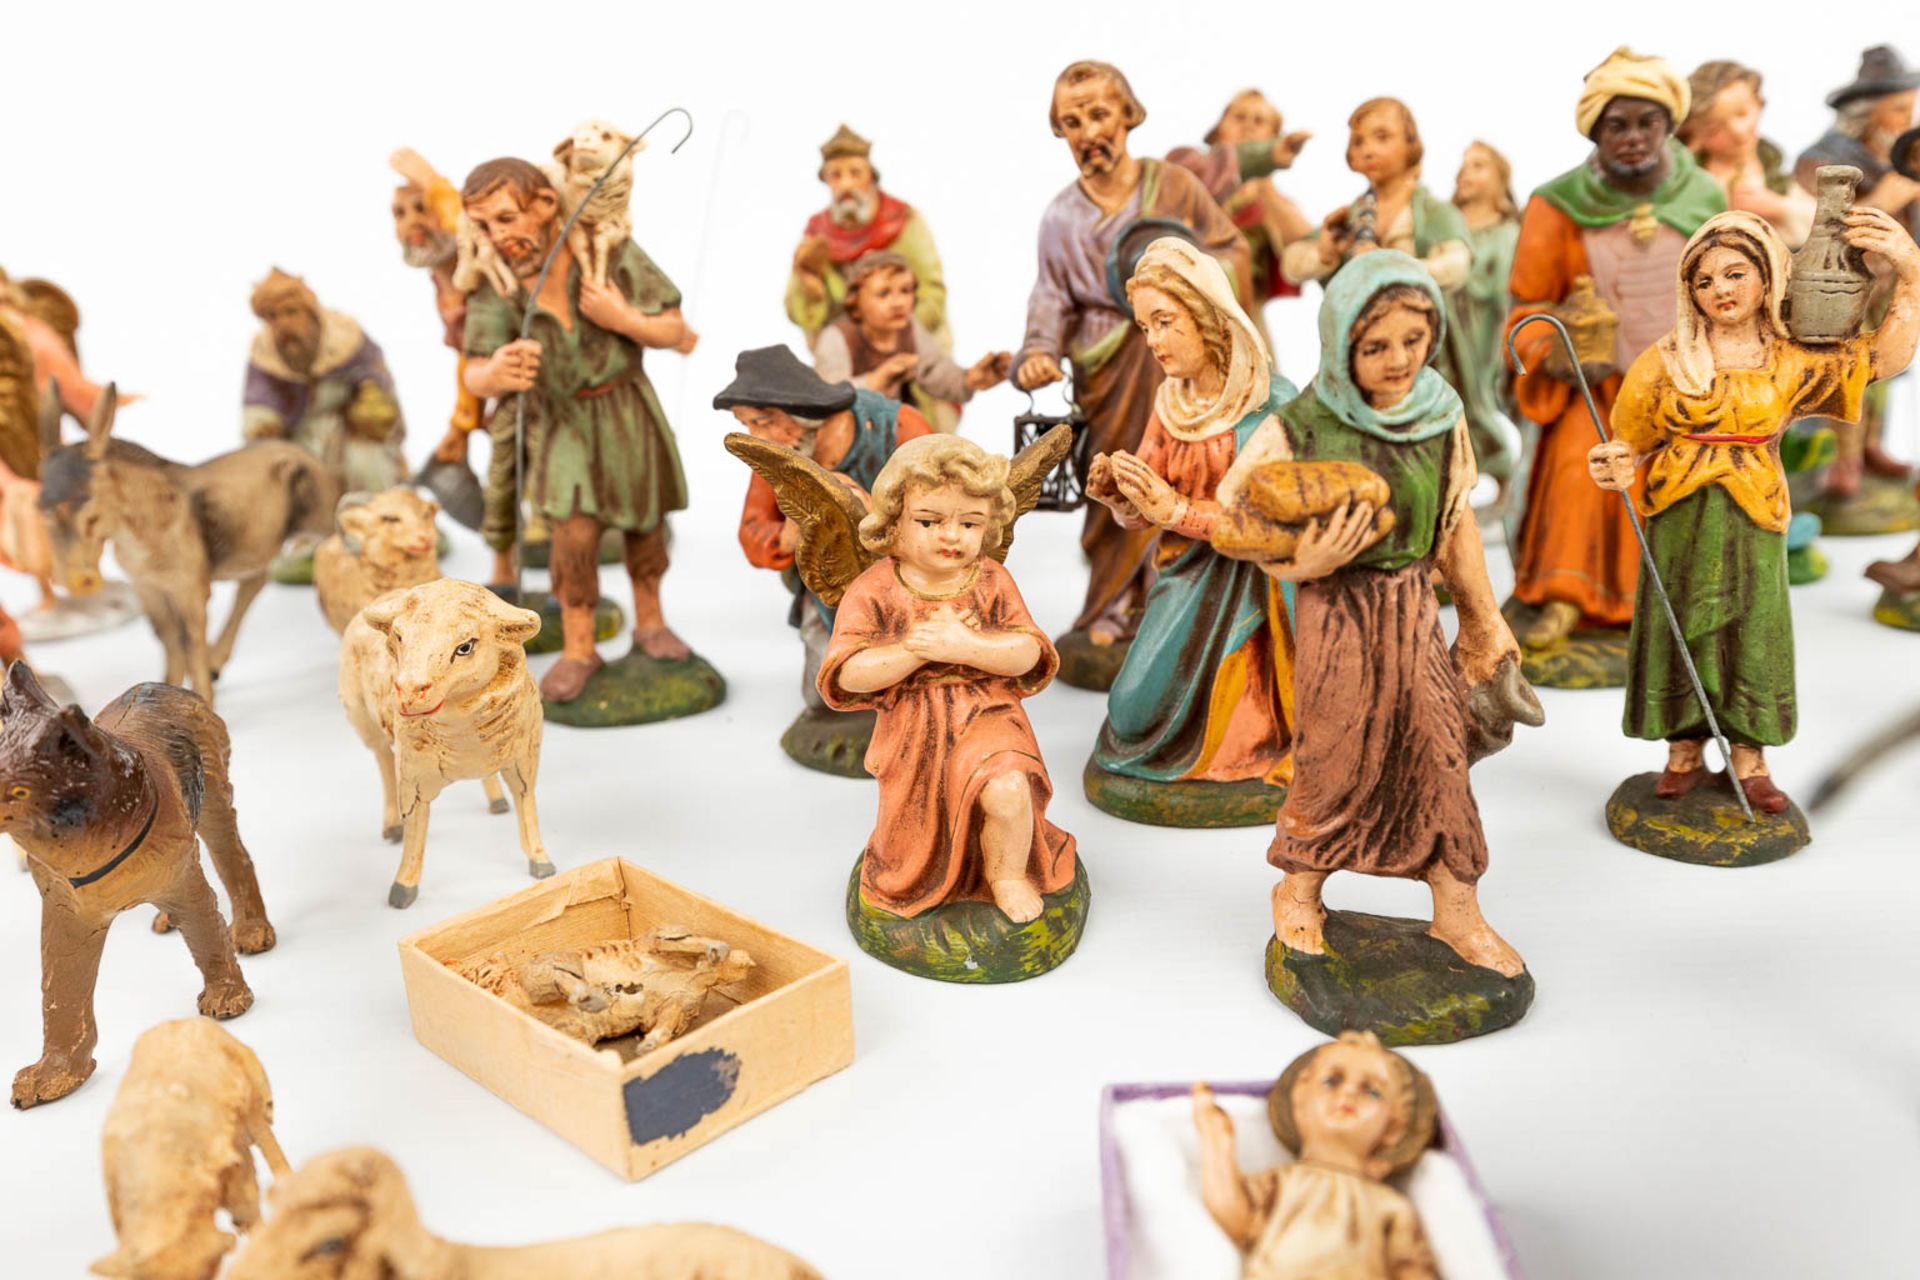 A large and extended Nativity scene with figurines and animals made of papier maché. - Image 17 of 20